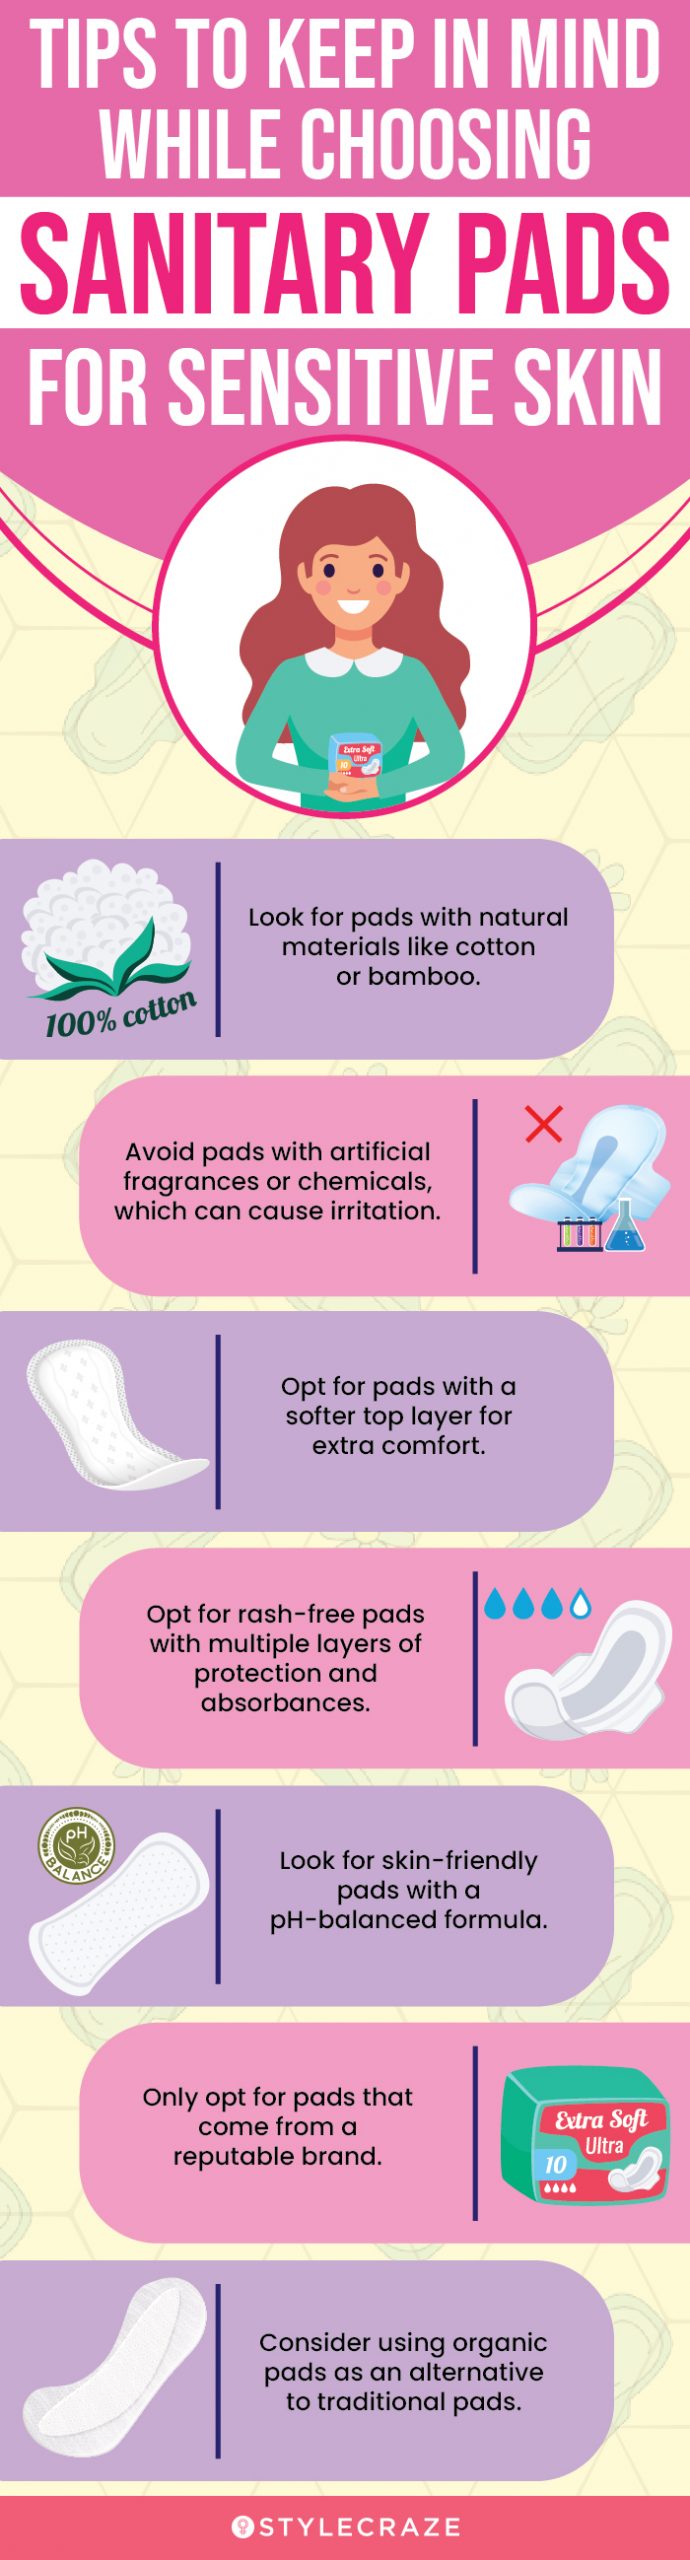 Tips To Keep In Mind While Choosing Sanitary Pads For Sensitive Skin (infographic)